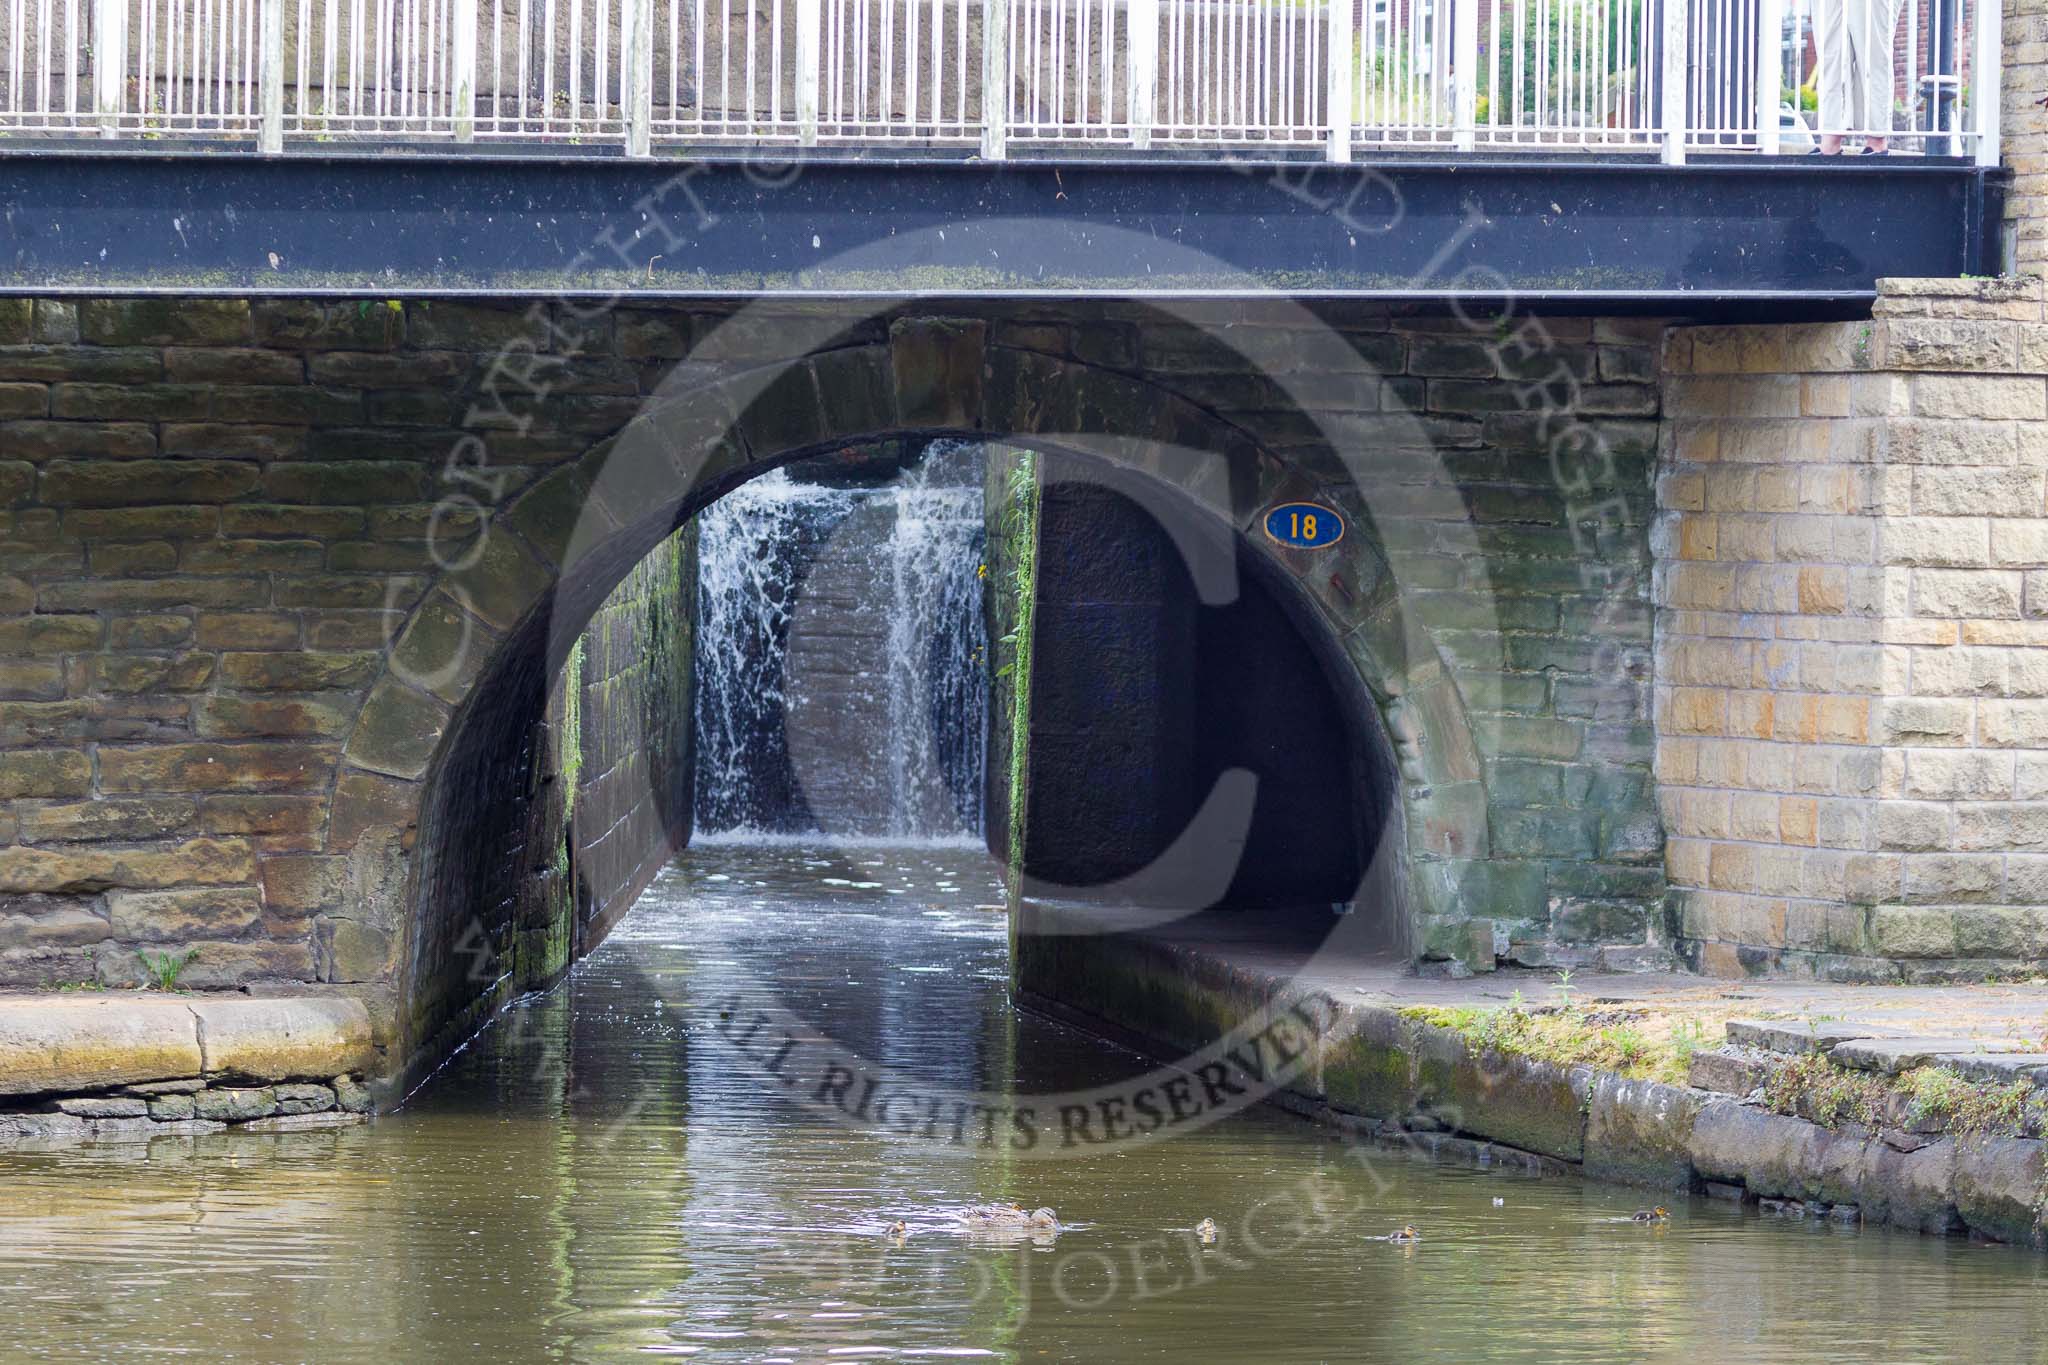 : Marple lock 13: There is a small tunnel, just below the "18" (which refers to the bridge), for boatmen to leave the boat when entering the lock..




on 03 July 2015 at 17:40, image #81